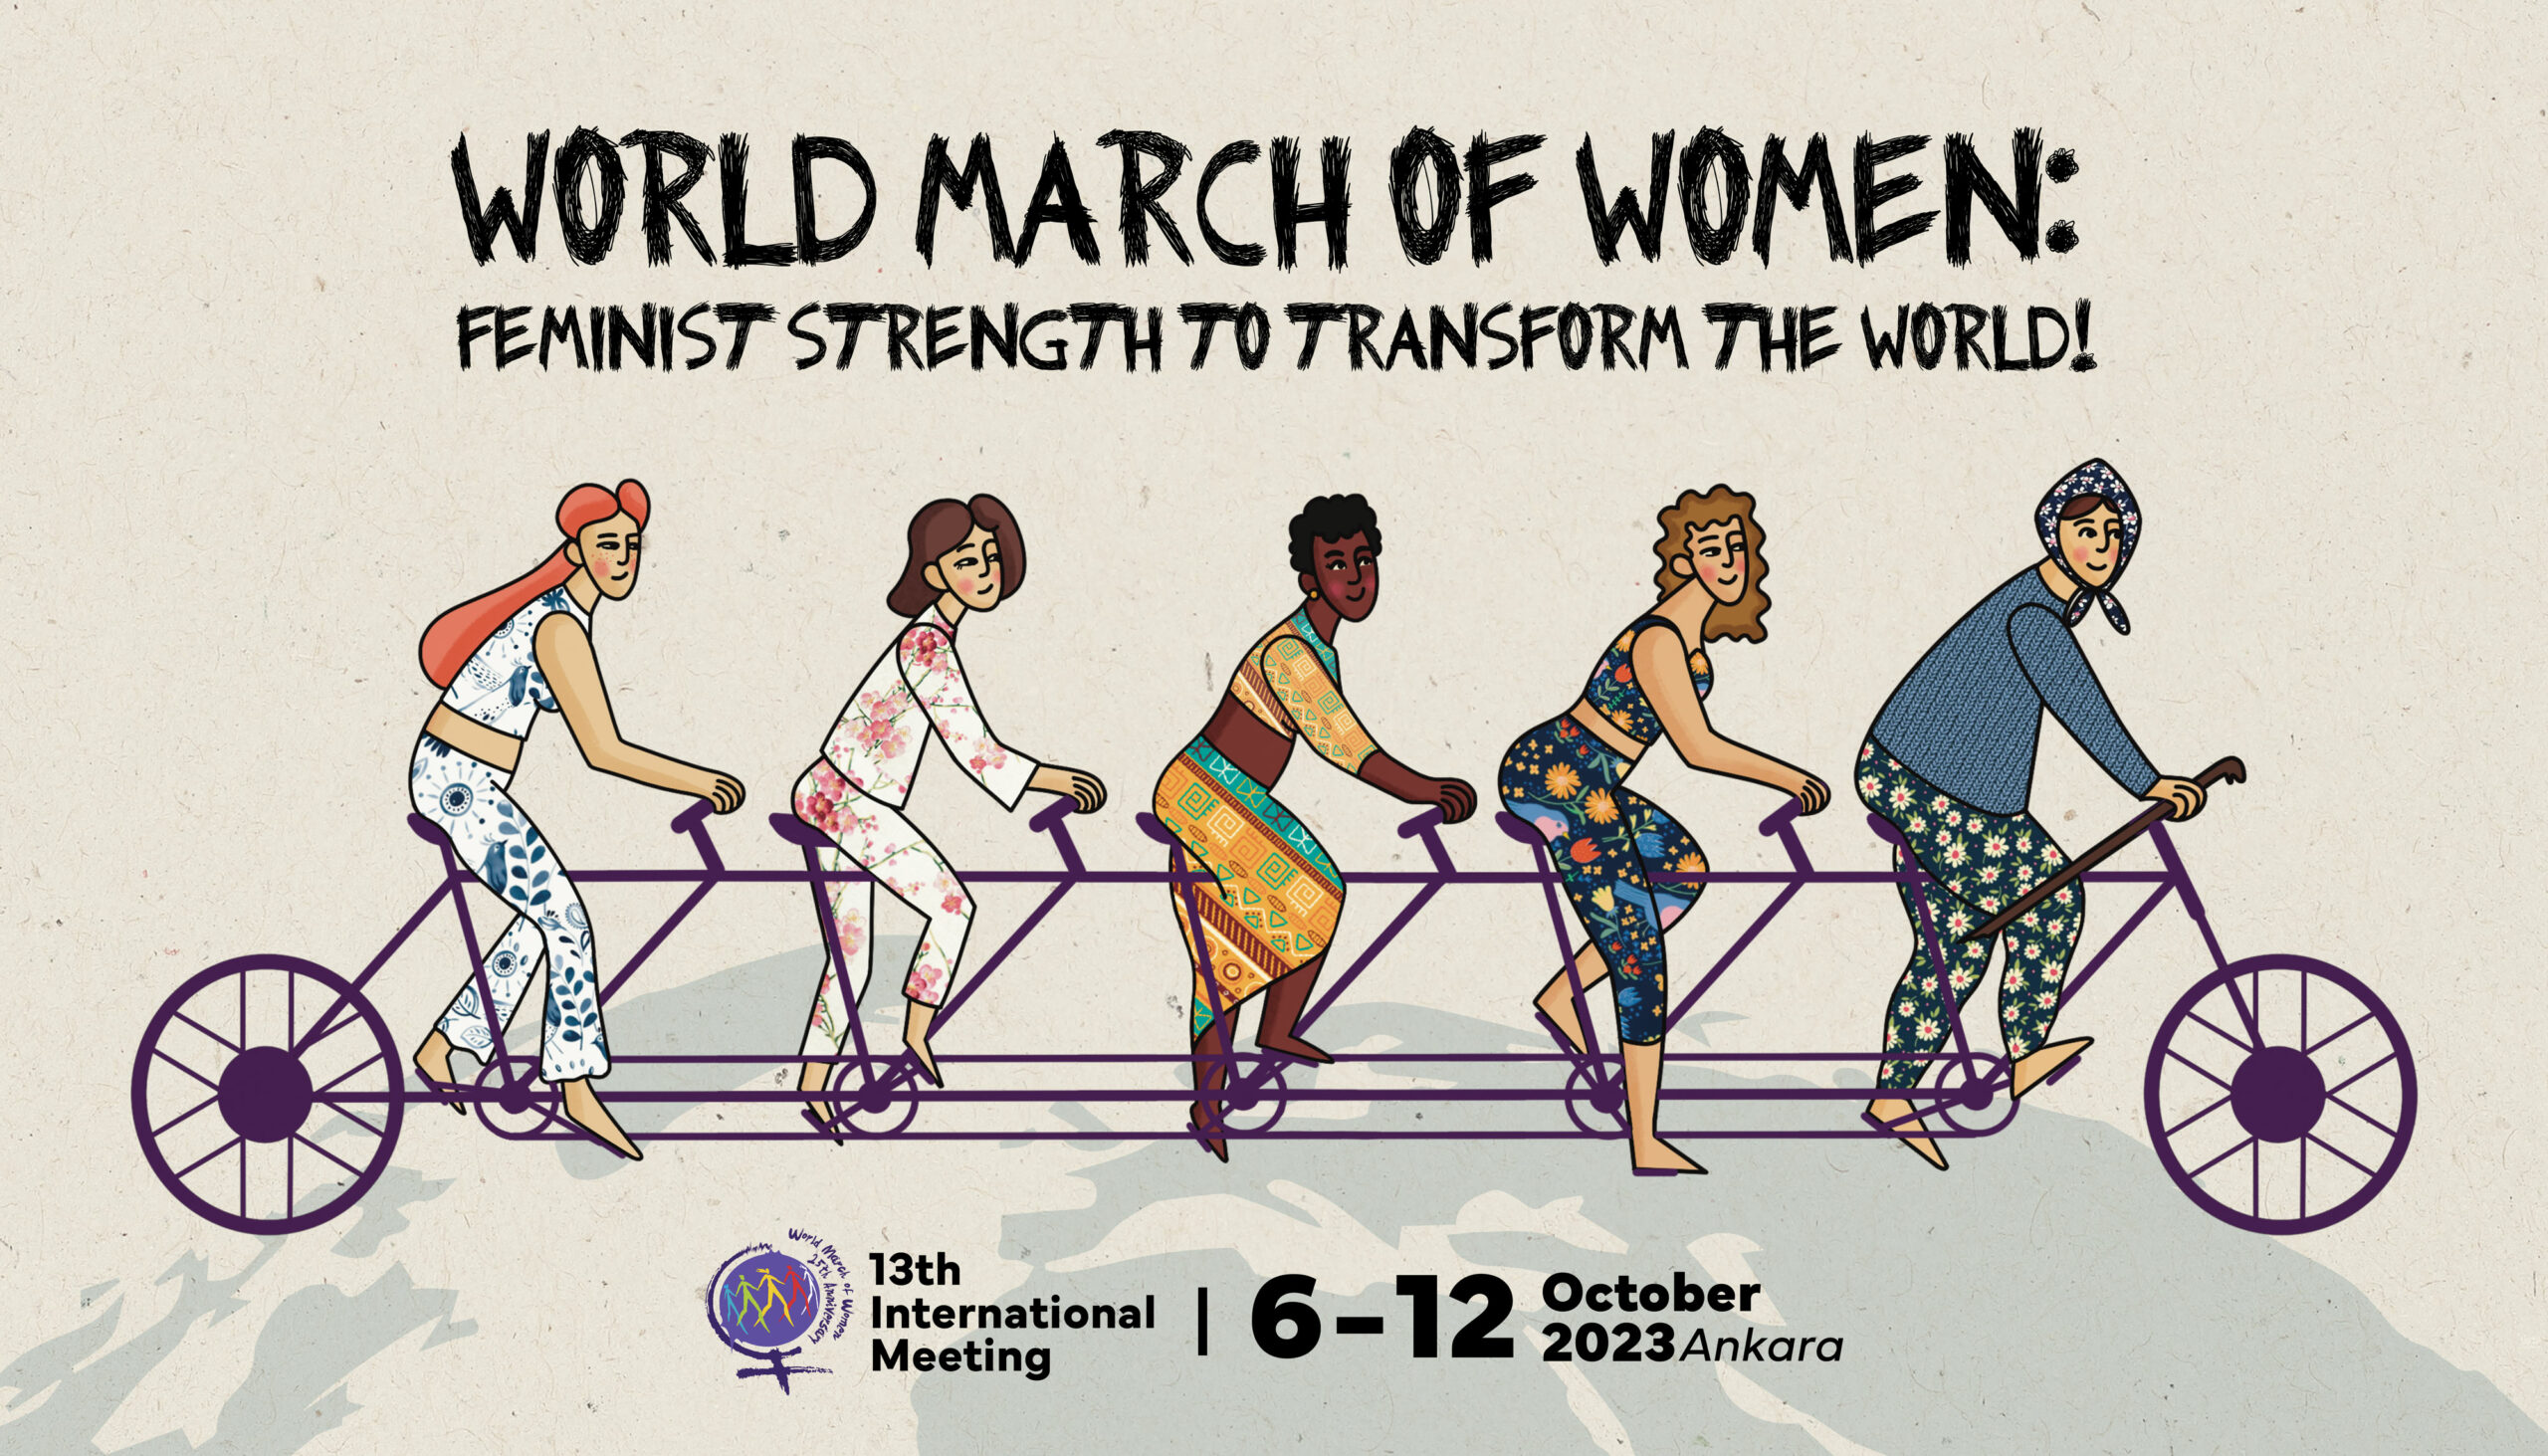 Countdown has begun for the 13th International Meeting of the World March of Women: 6th-12th October 2023, Ankara, Turkey